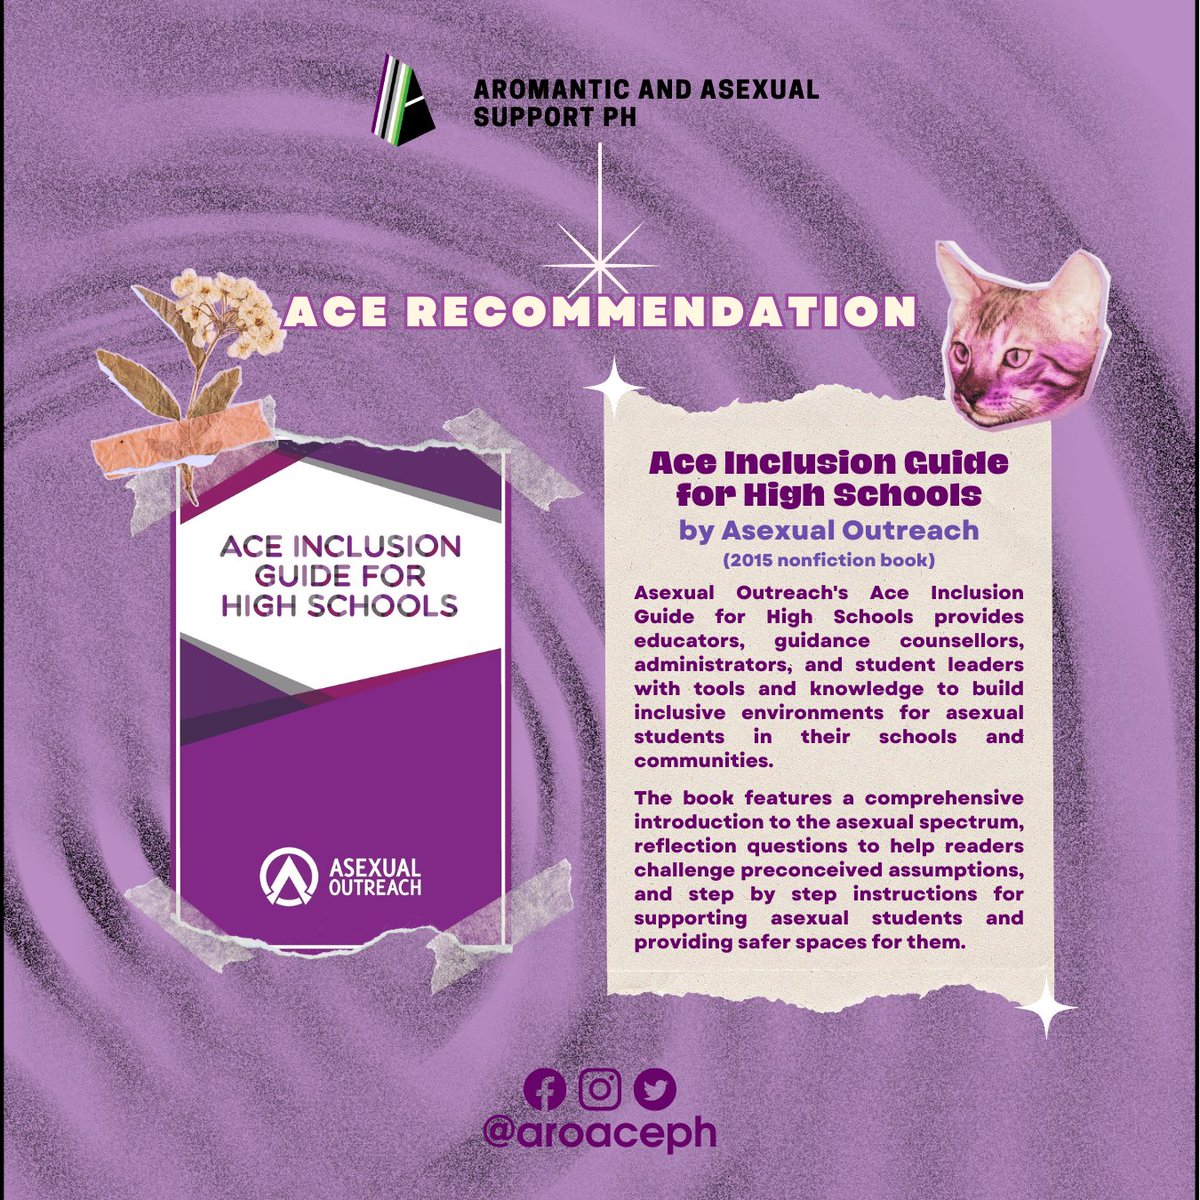 ACE RECOMMENDATION: Ace Inclusion Guide for High Schools by by Asexual Outreach

'This book provides educators, guidance counsellors, administrators, and student leaders with tools and knowledge to build inclusive environments for ace students in their schools and communities.'